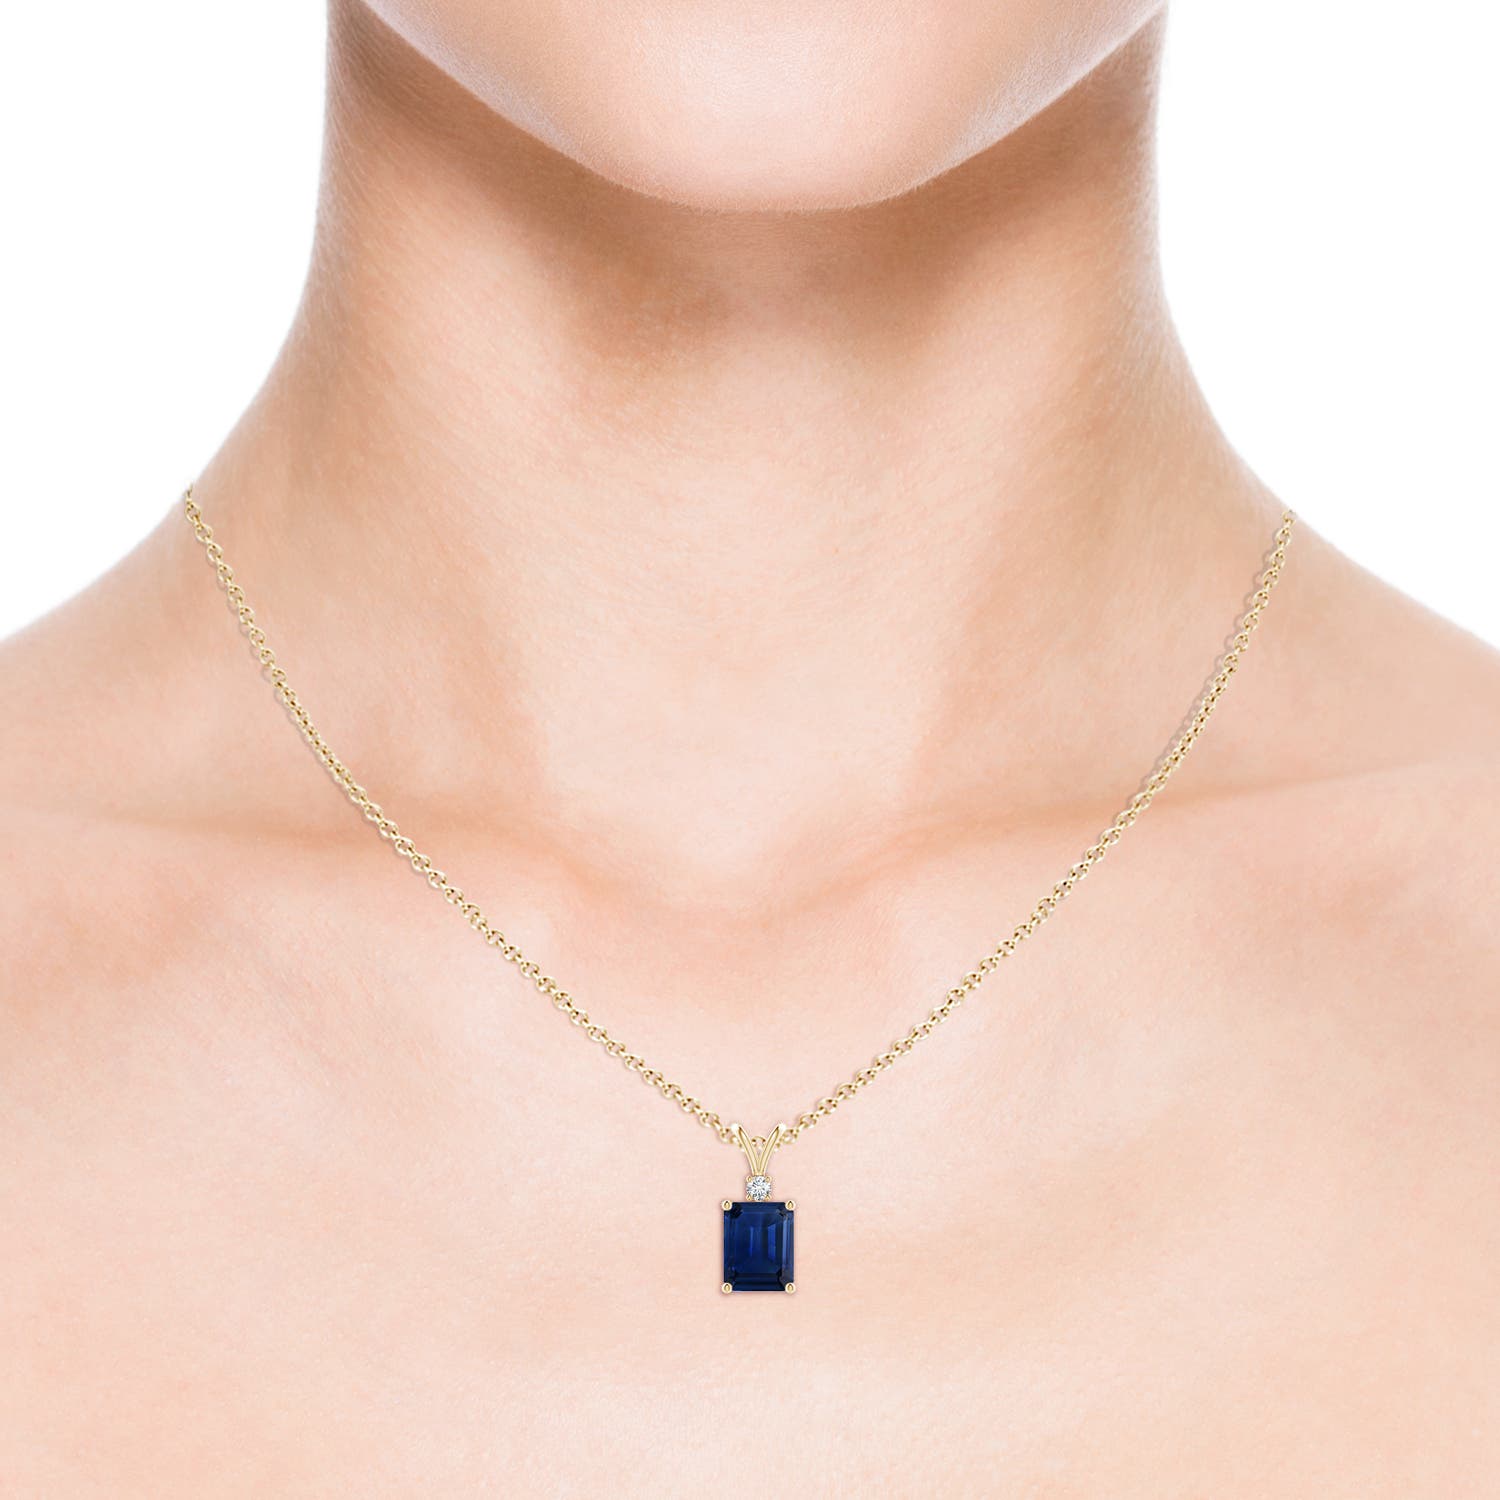 AAA - Blue Sapphire / 2.52 CT / 14 KT Yellow Gold